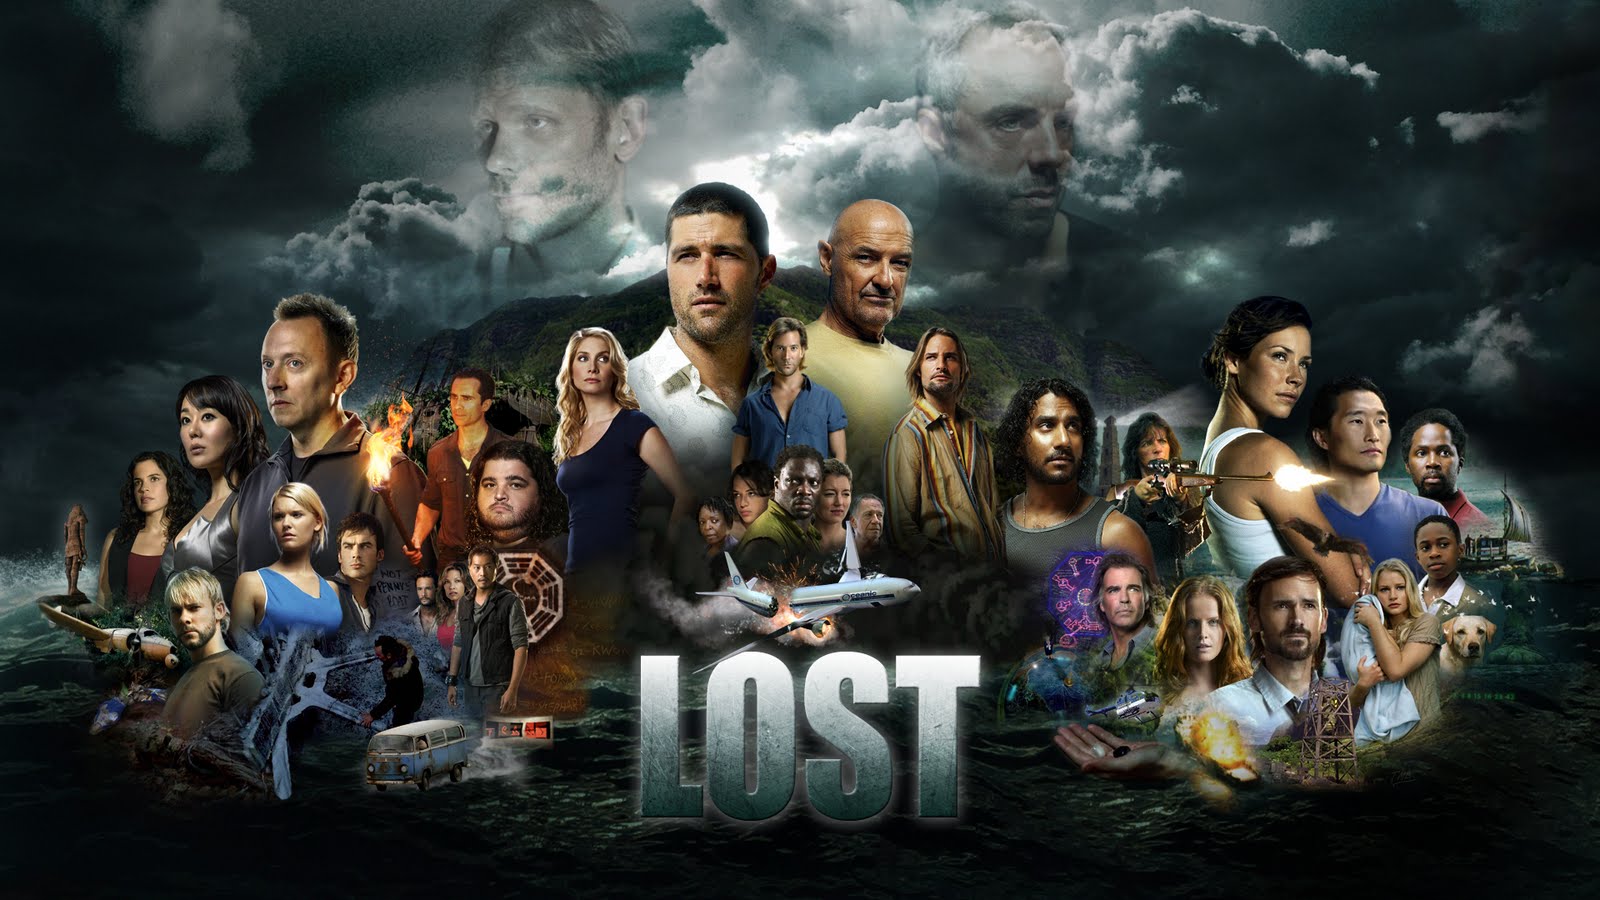 LOST Saga PosterWallpaper by the butcher LOST